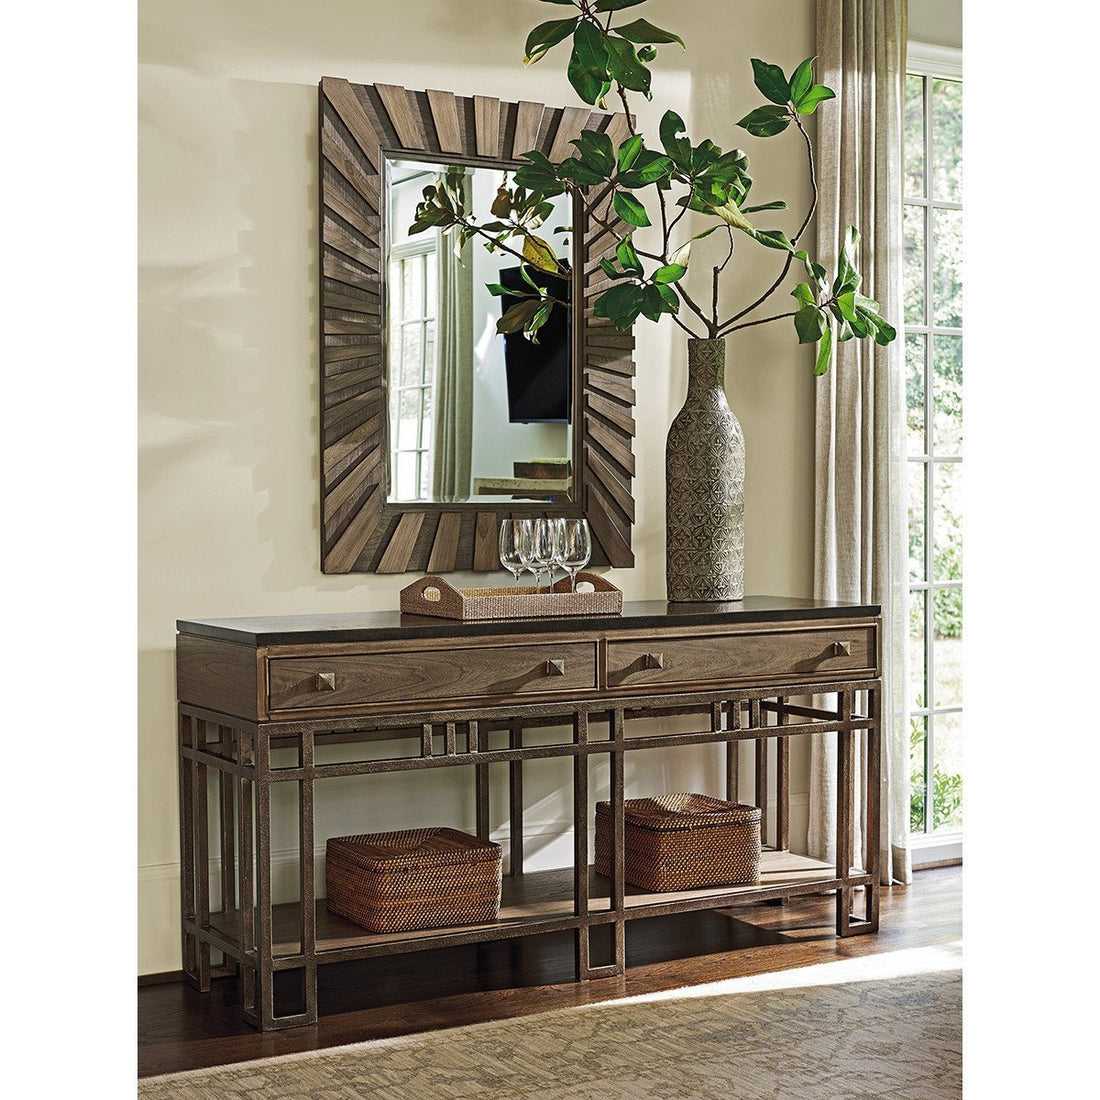 Tommy Bahama Cypress Point Twin Lakes Sideboard